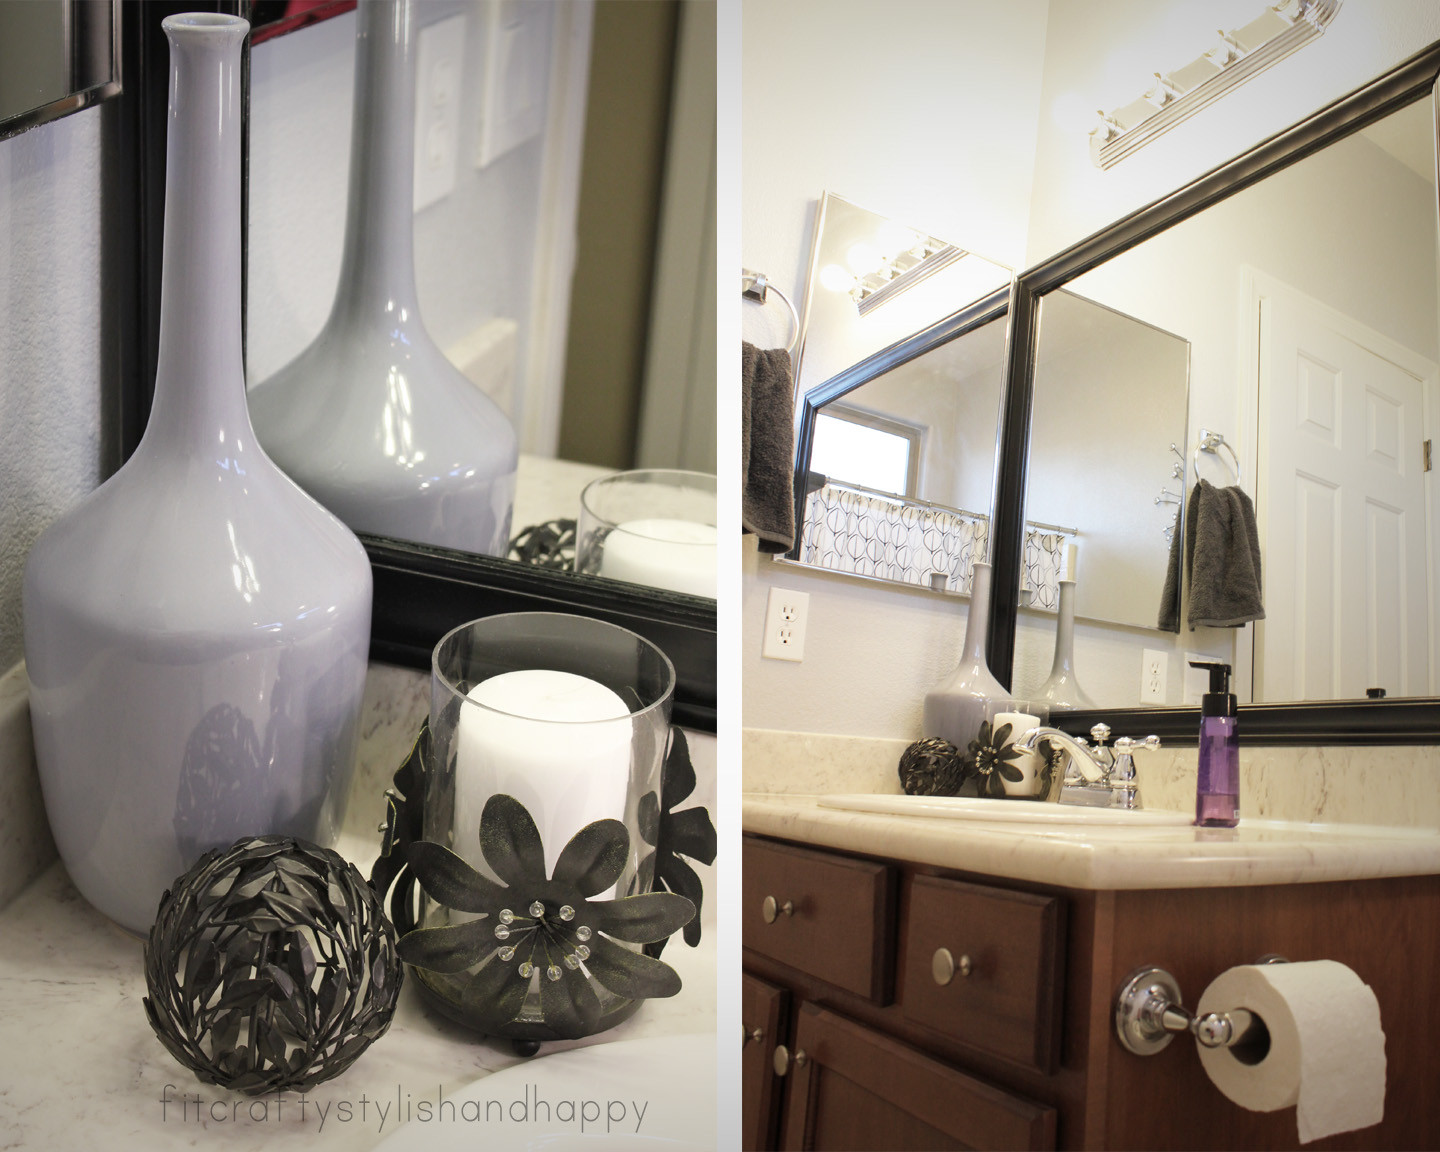 Black And Grey Bathroom Decor
 Fit Crafty Stylish and Happy Guest Bathroom Makeover